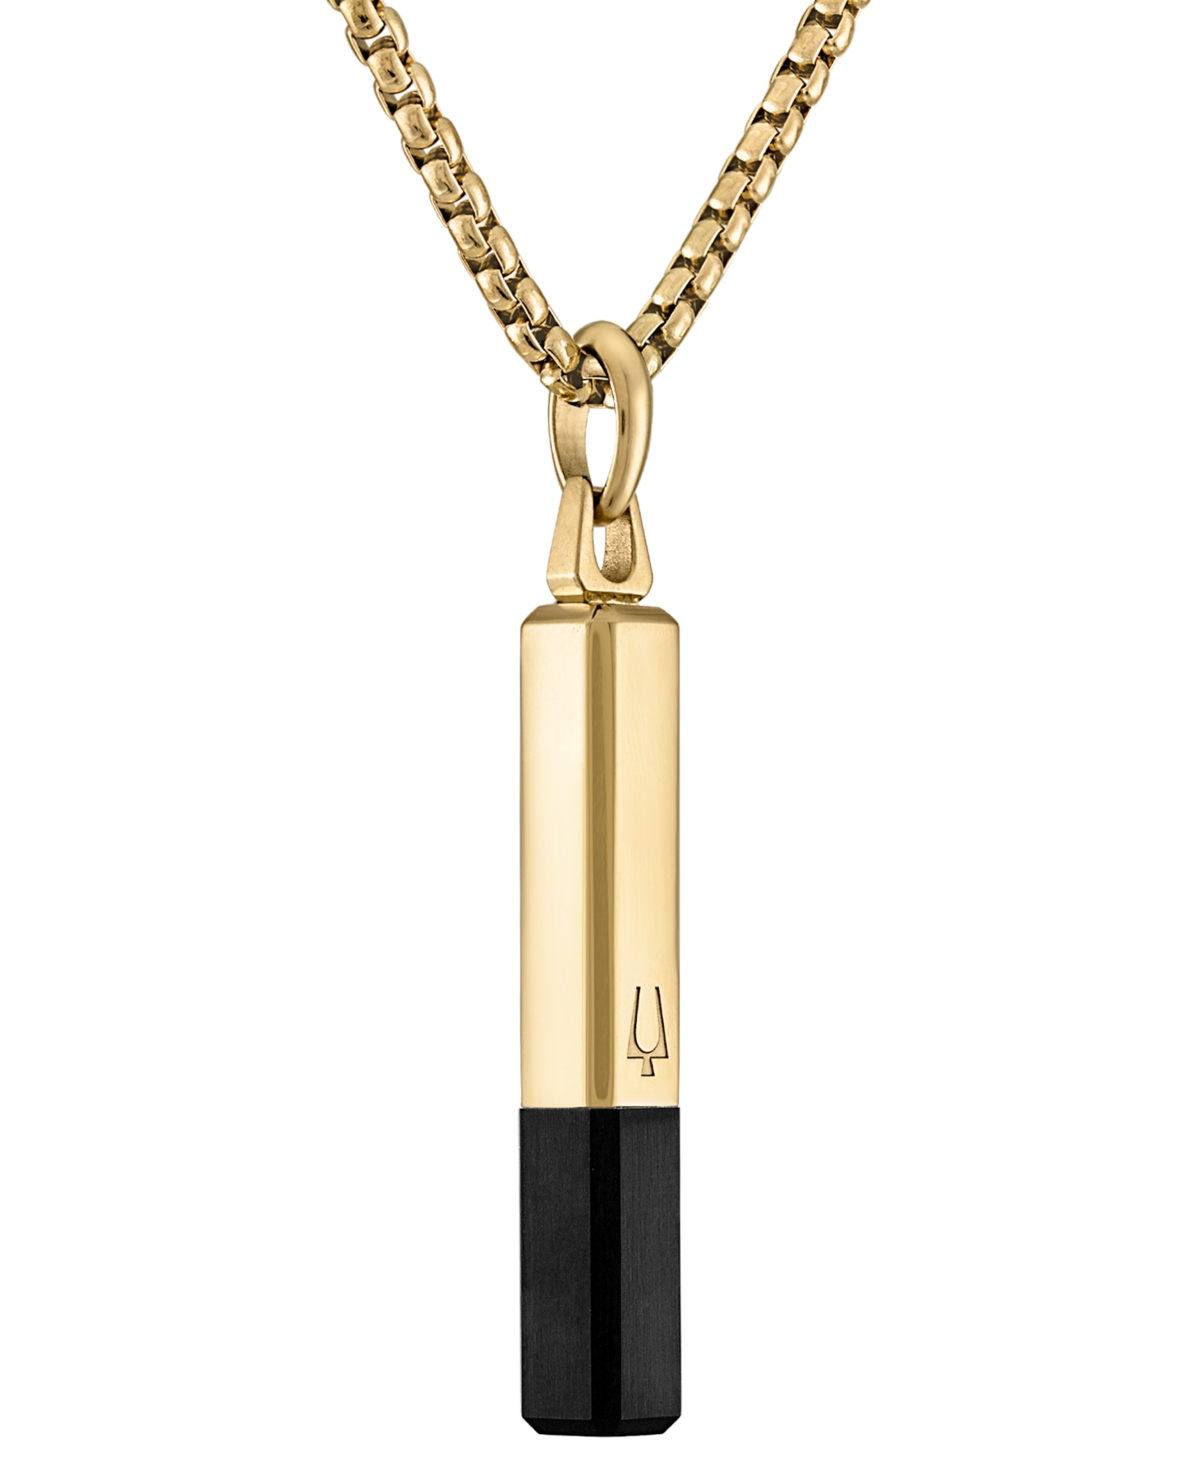 Bulova Gold-tone & Black Ip Stainless Steel Black Spinel Pendant Necklace, 24" + 2" Extender In Gold Tone